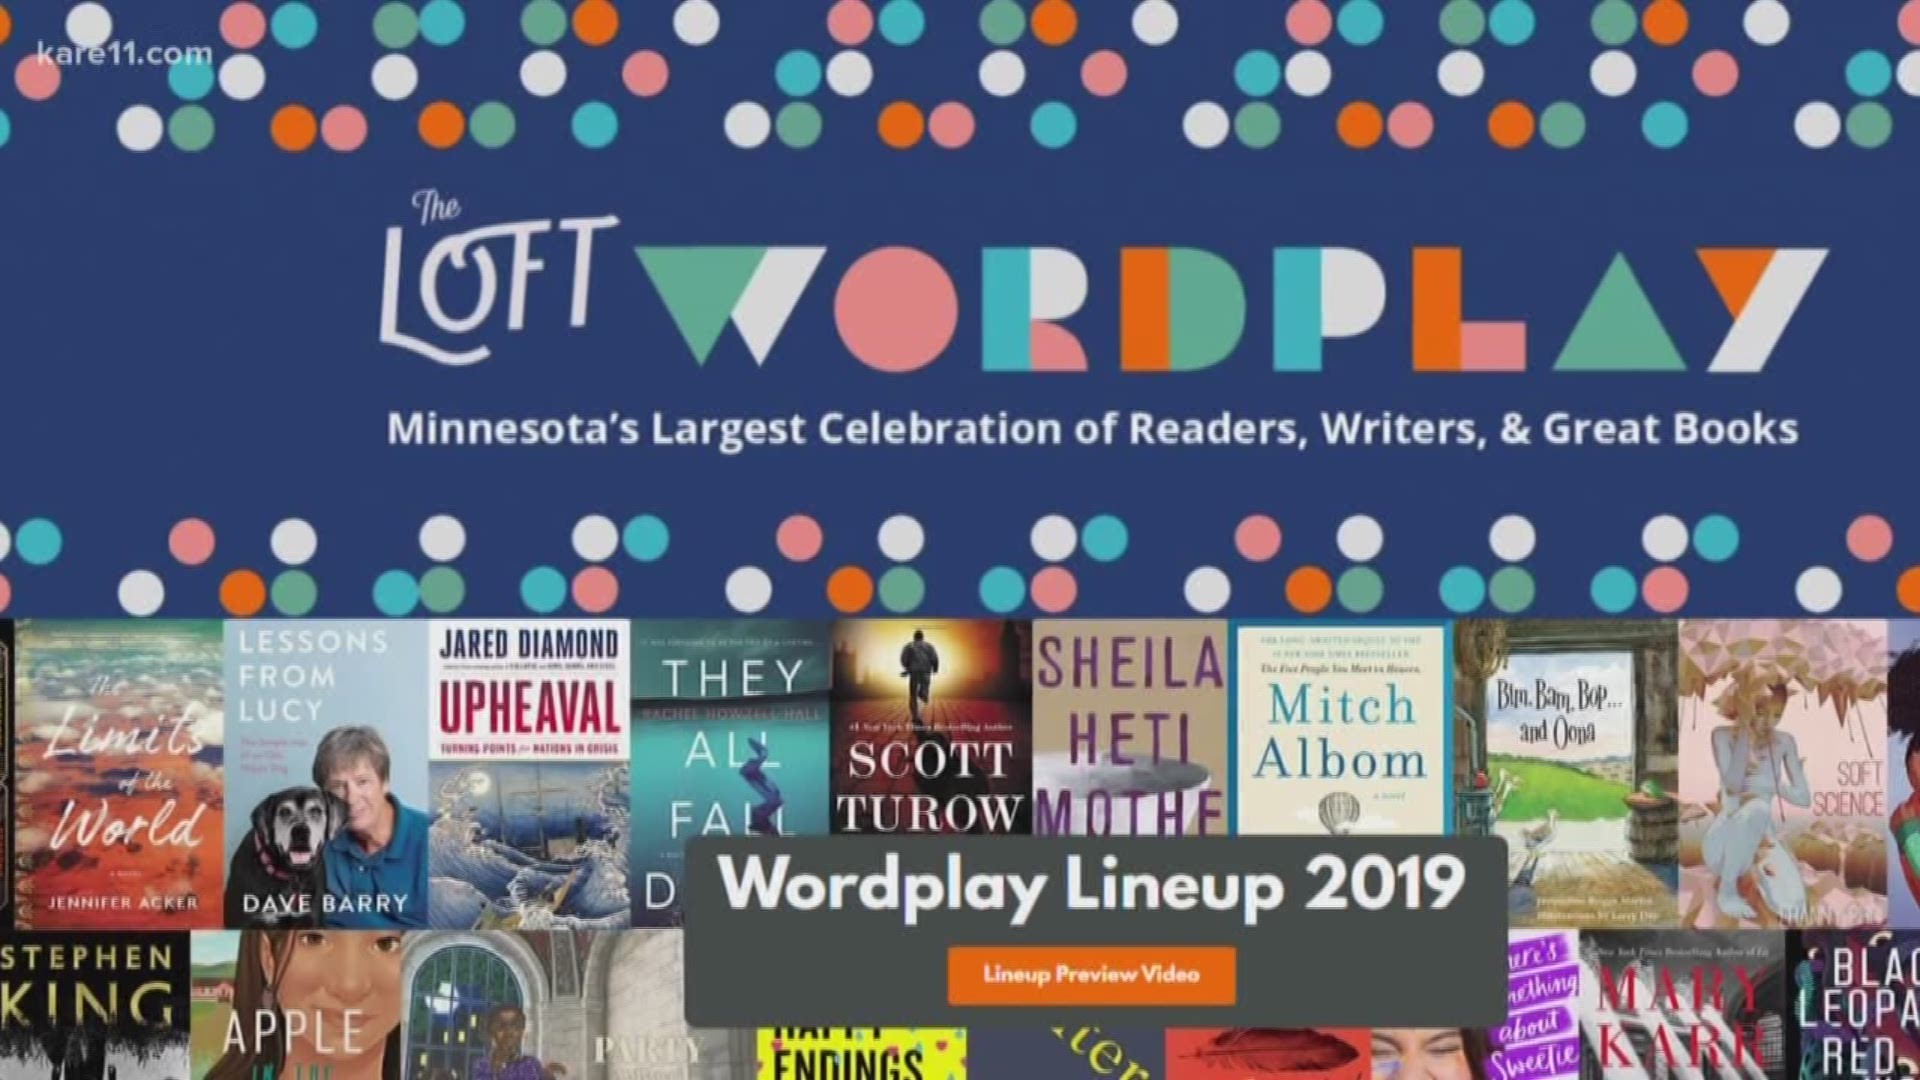 Downtown Minneapolis will be busy with readers, writers and it's attracting some big-named authors, too.